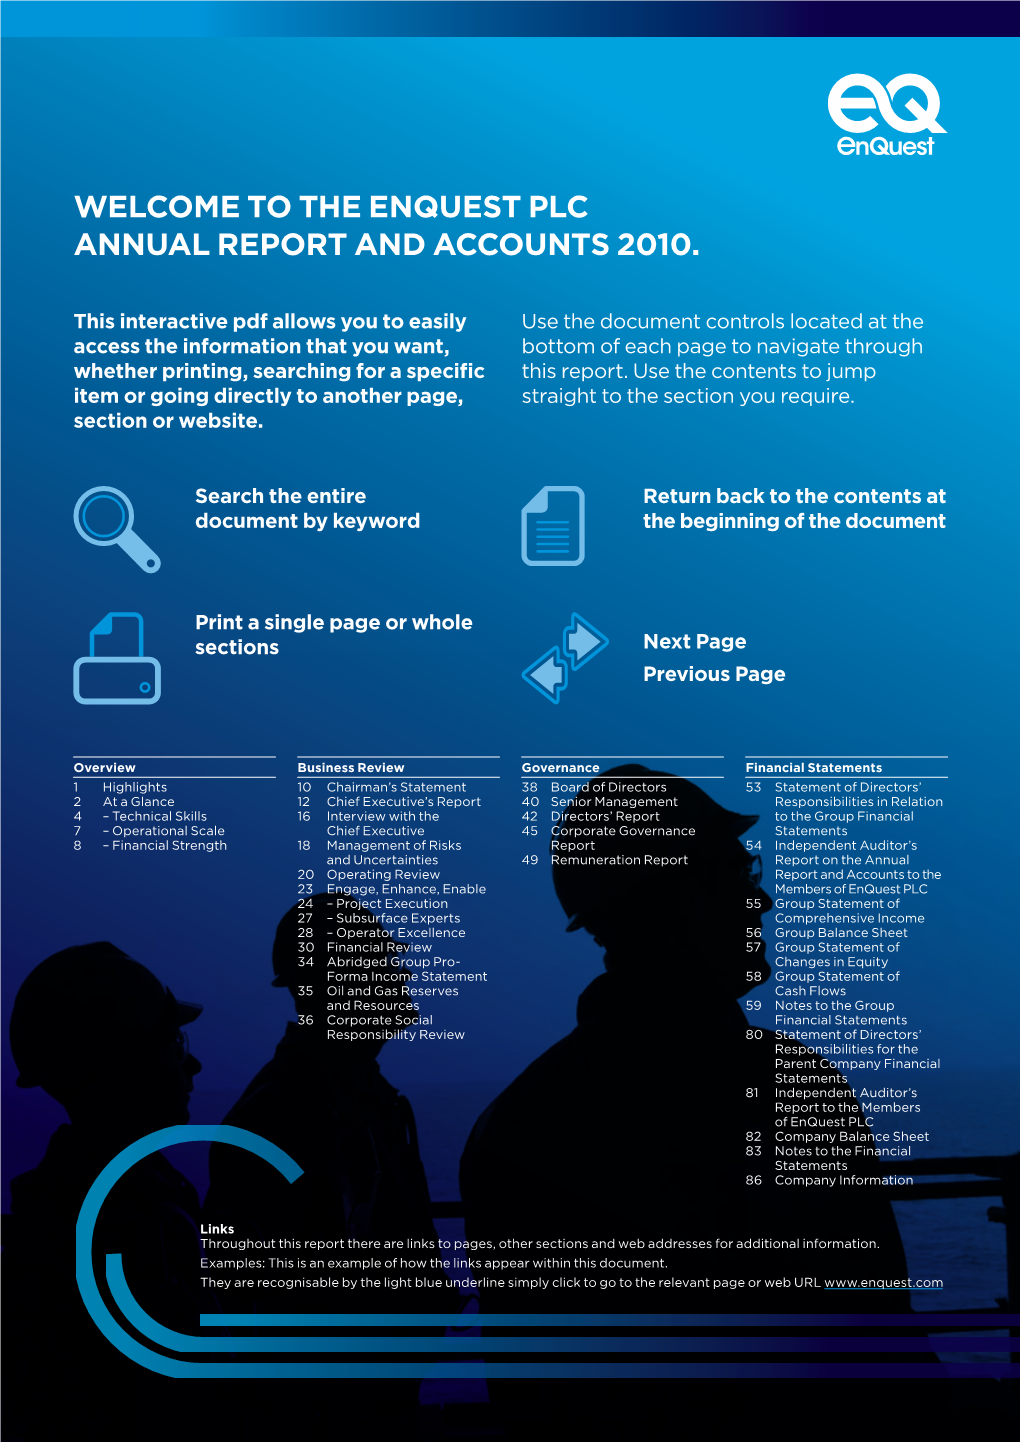 The ENQUEST PLC Annual Report and ACCOUNTS 2010